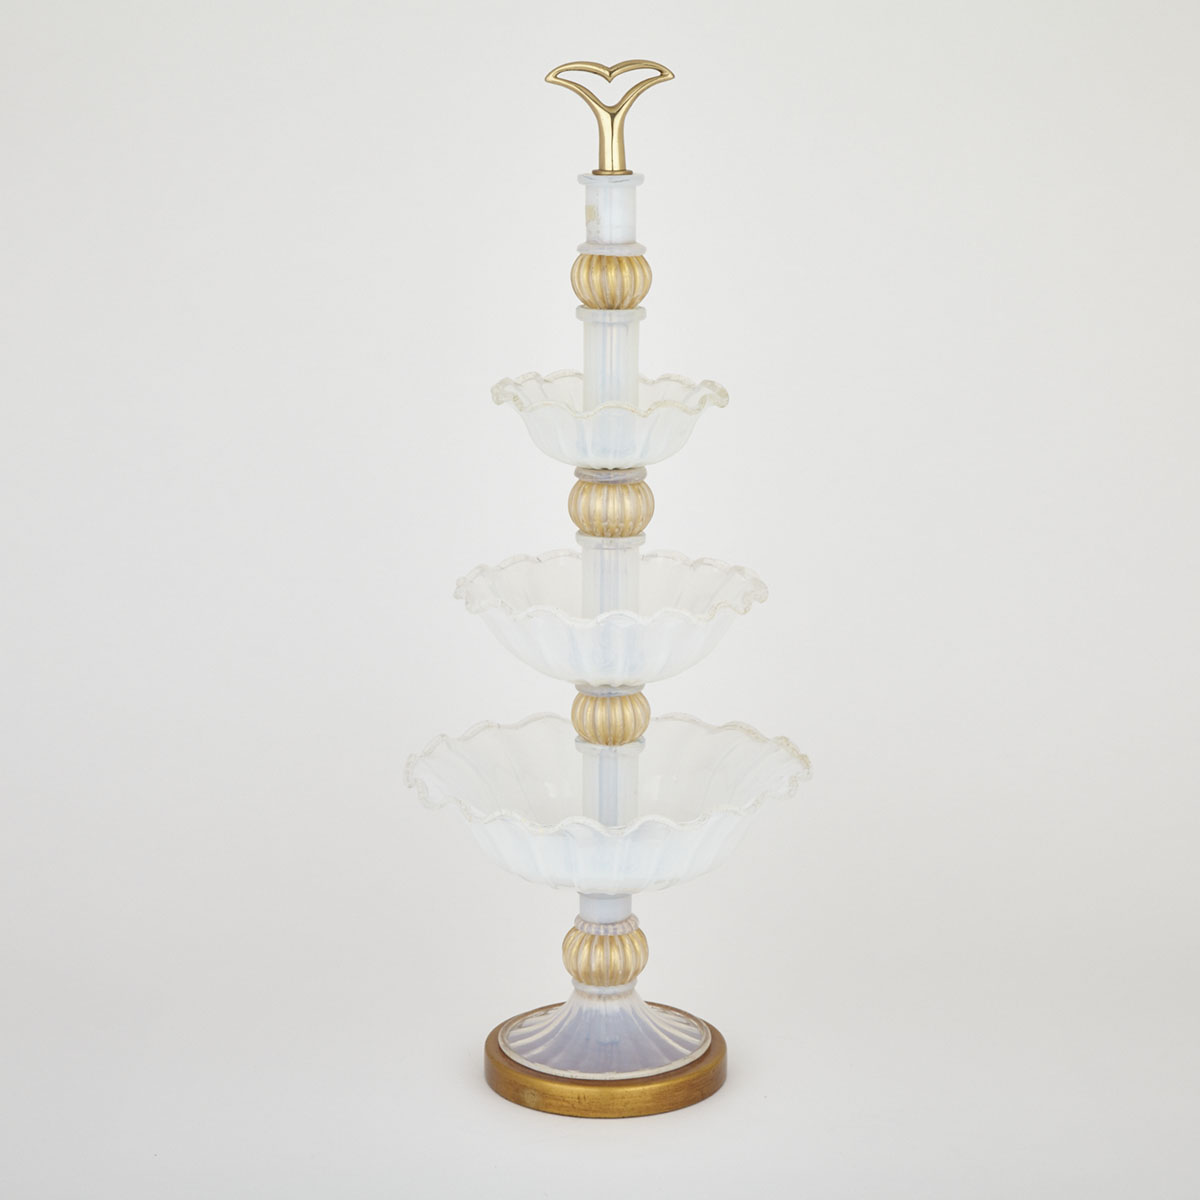 Murano Opalescent and Gilt Glass Three-Tiered Centrepiece, mid-20th century